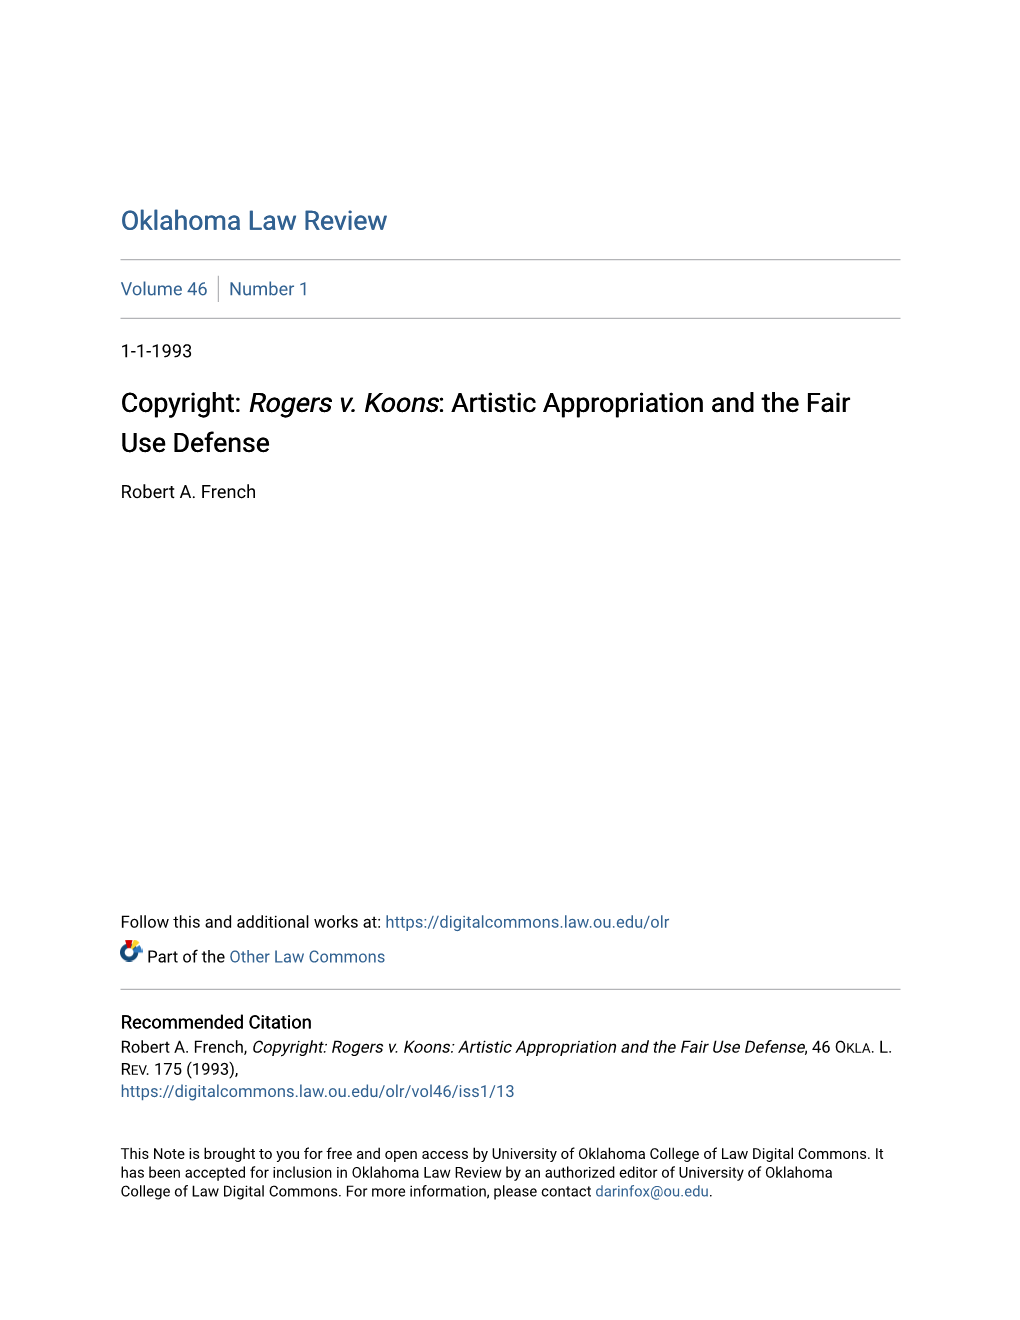 Rogers V. Koons: Artistic Appropriation and the Fair Use Defense